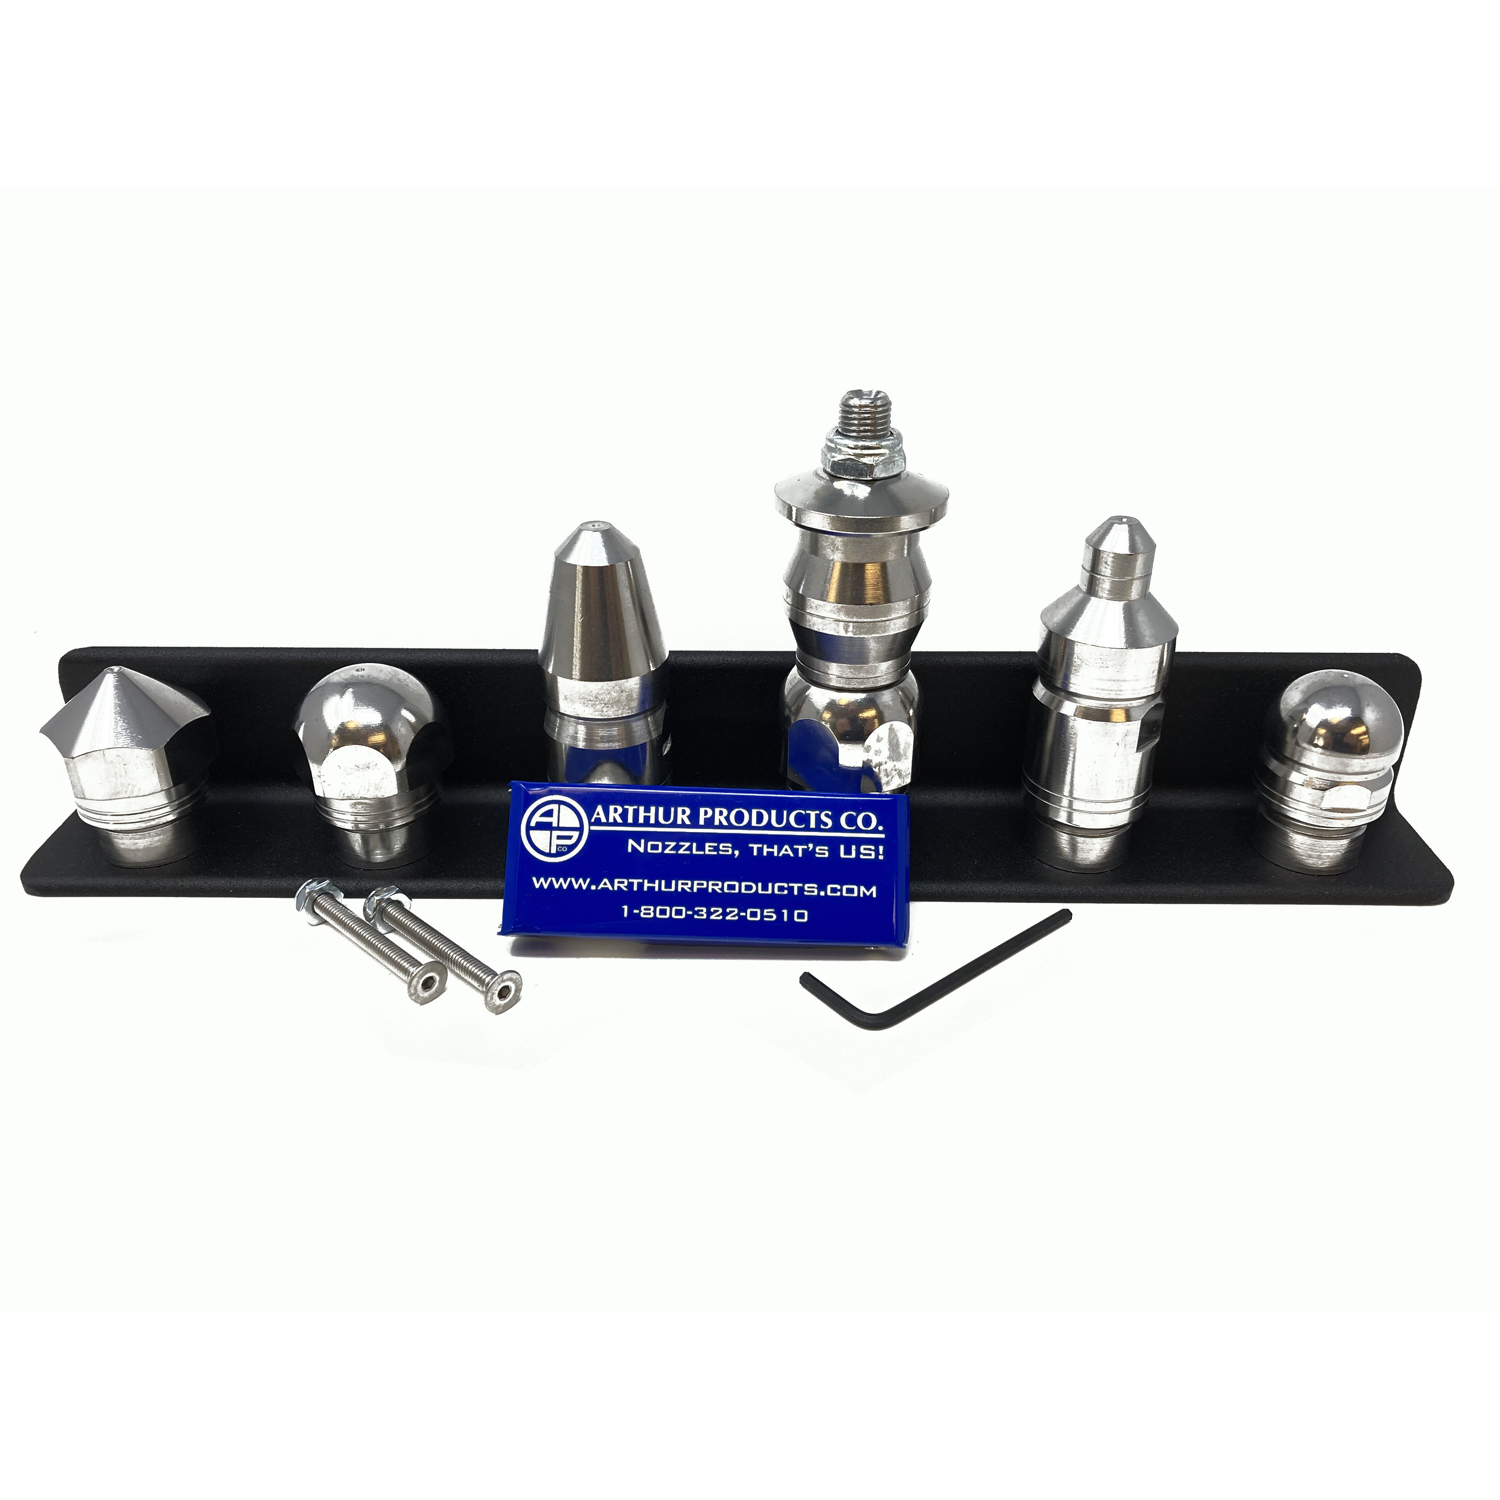 Jet Nozzle 6 Pack on a Rack